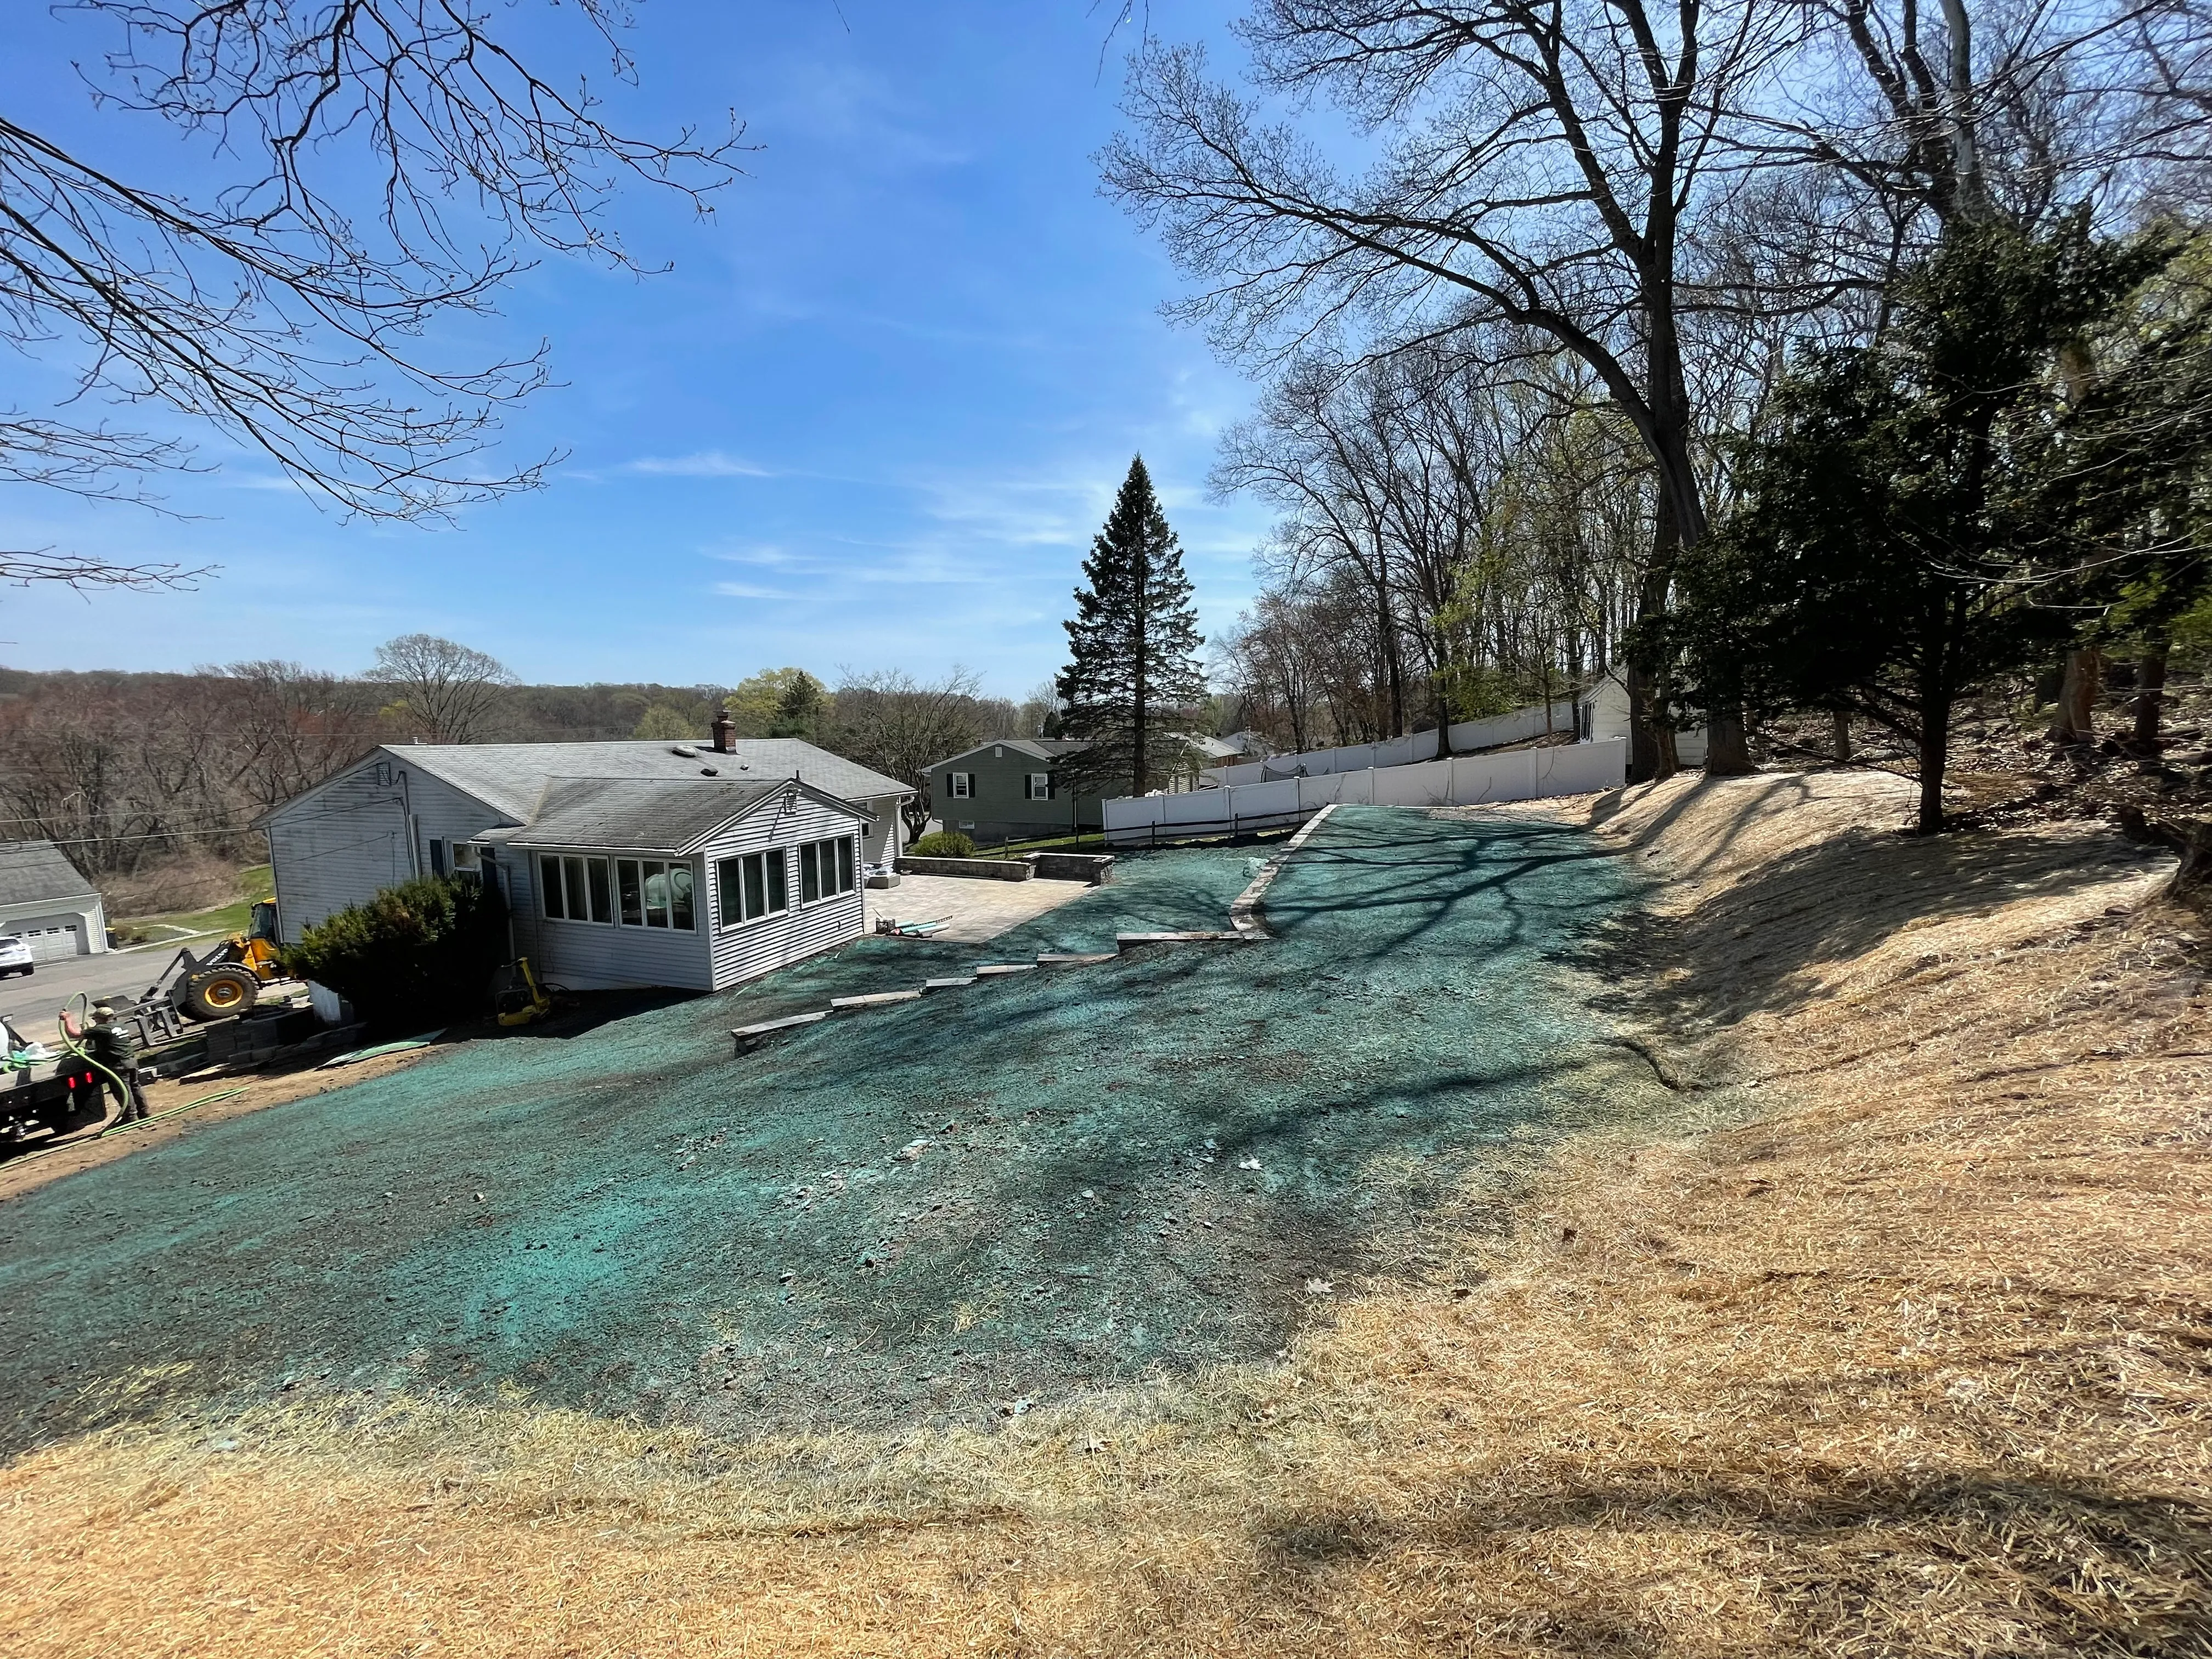 Commercial Snow and Ice Management for Hennessey Landscaping LLC in Oxford,  CT 